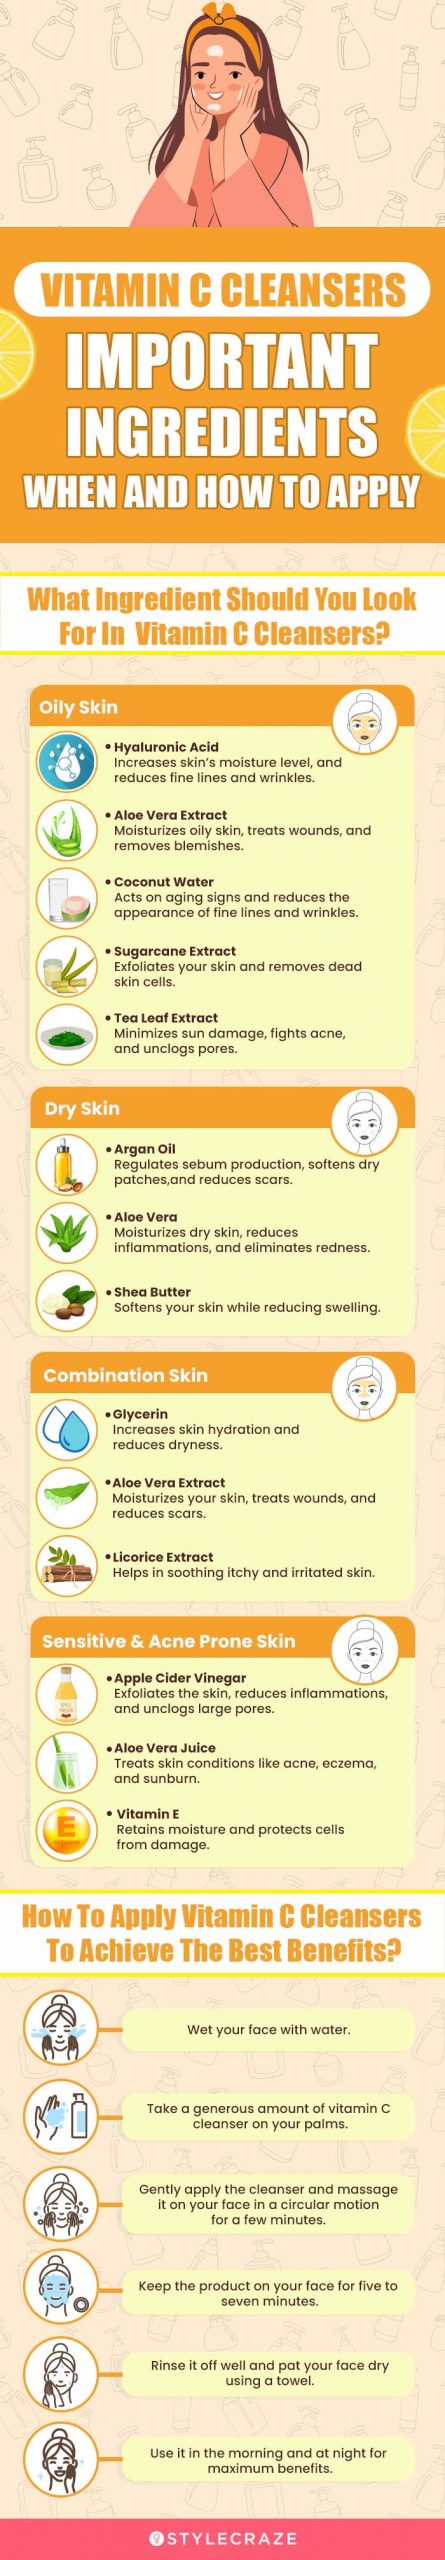 Vitamin C Cleansers: Important Ingredients, When & How To Apply [infographic]